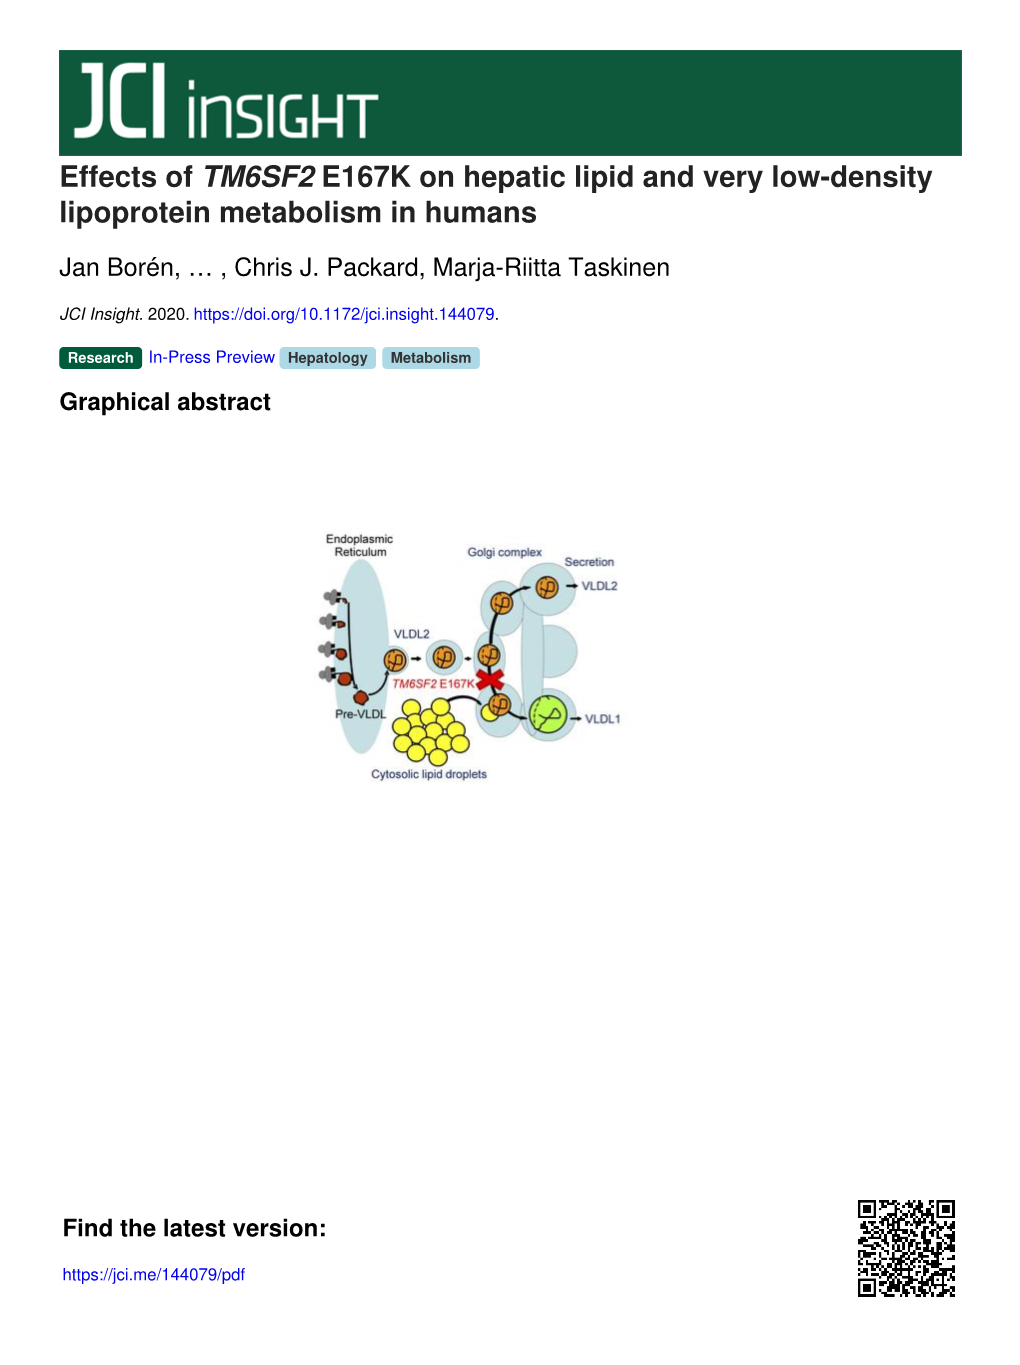 Effects of TM6SF2 E167K on Hepatic Lipid and Very Low-Density Lipoprotein Metabolism in Humans